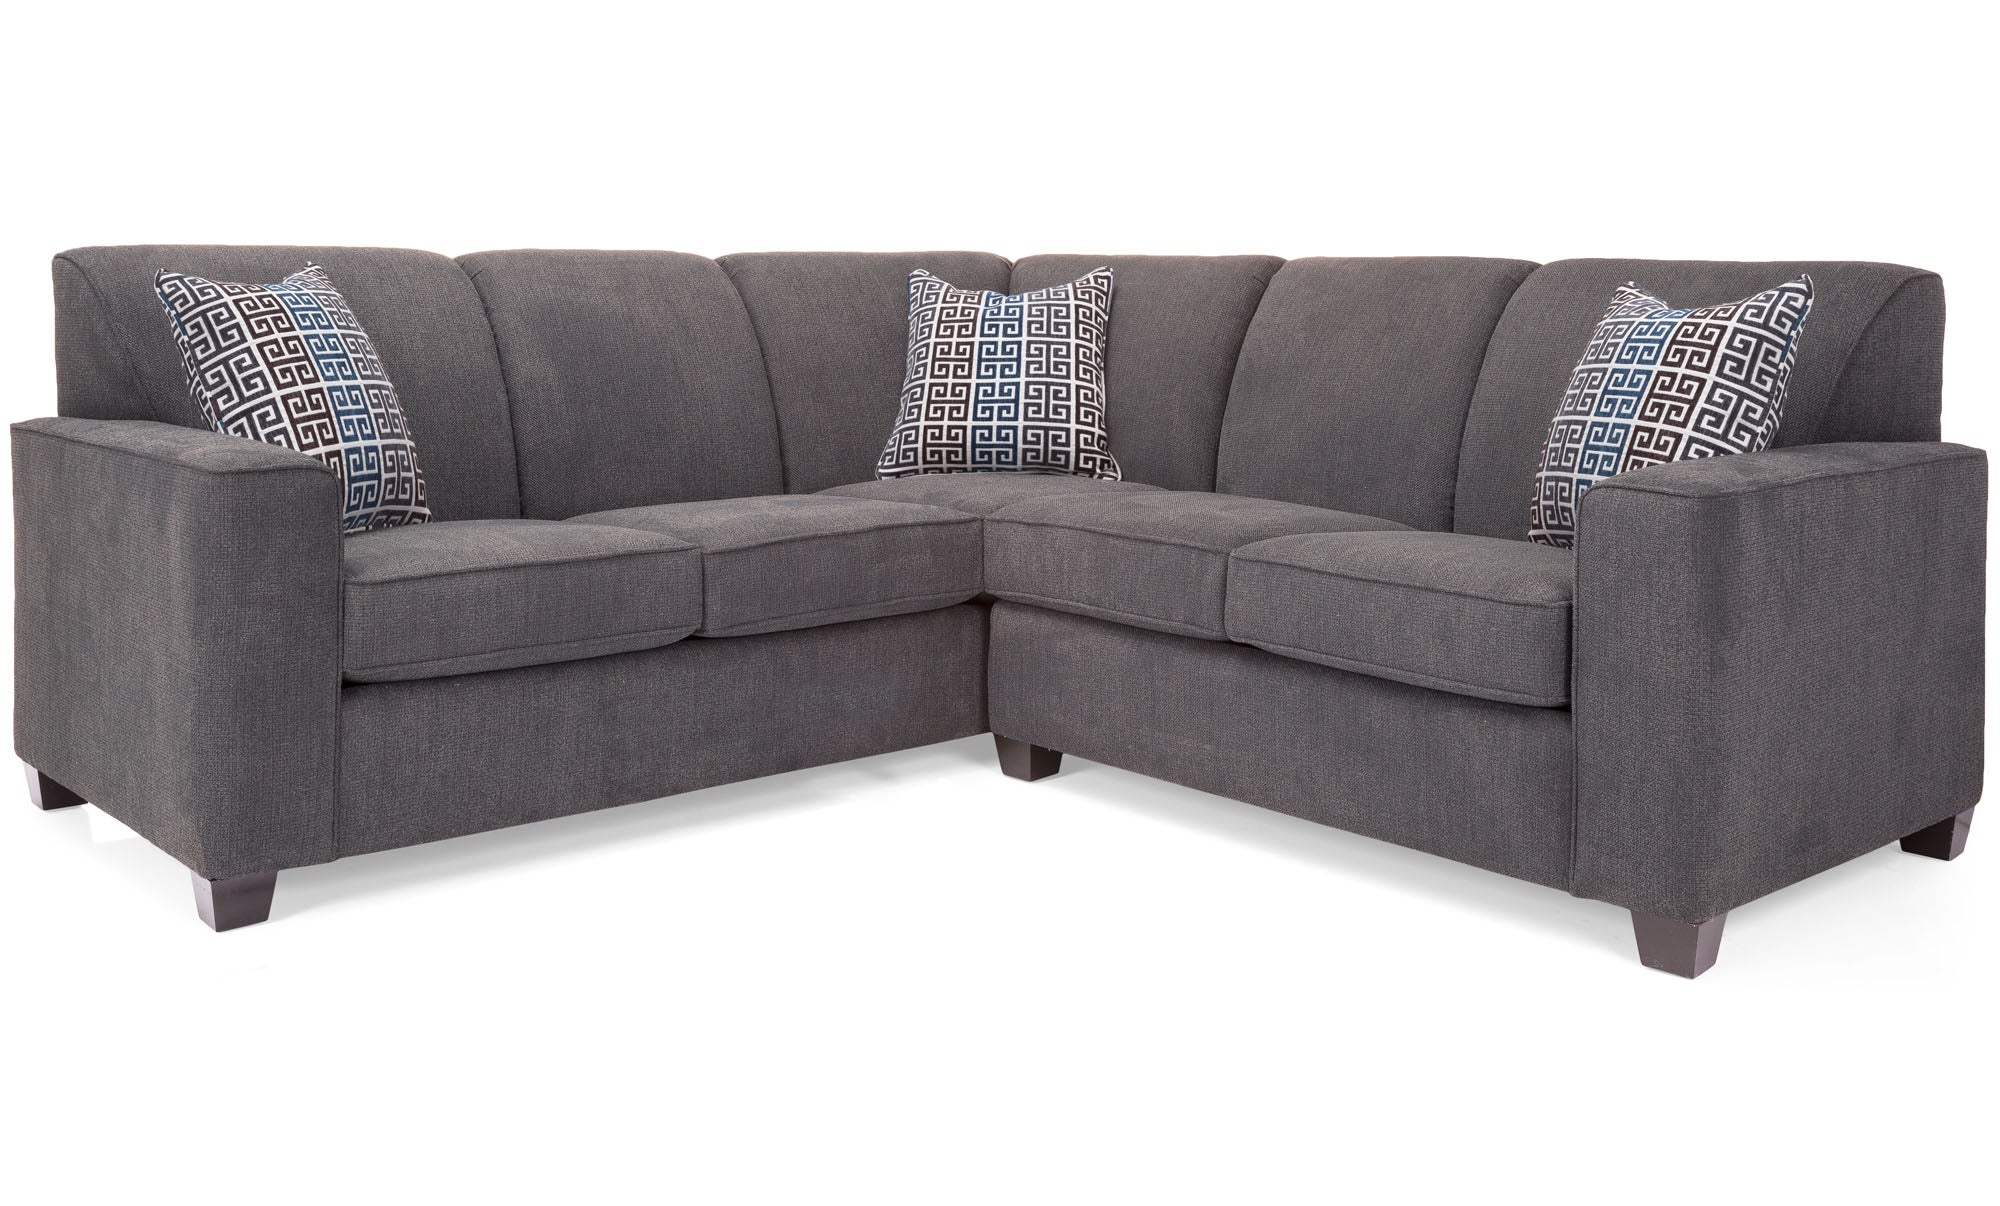 Lotus Charcoal 2 Piece Sectional - MJM Furniture